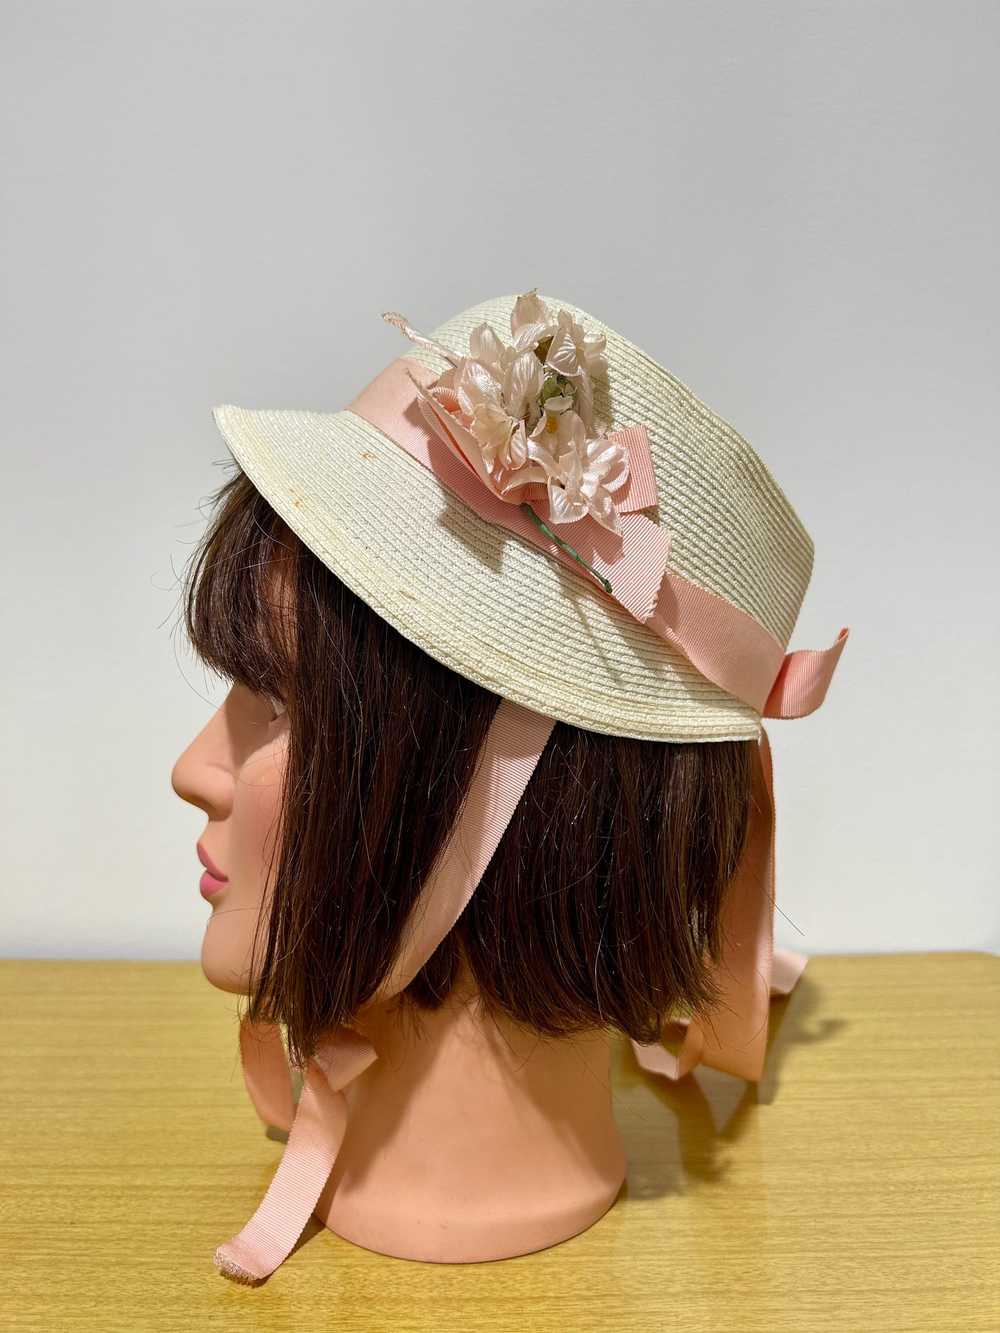 Vintage Sun Hat with Pink Ribbon and Flowers - image 2